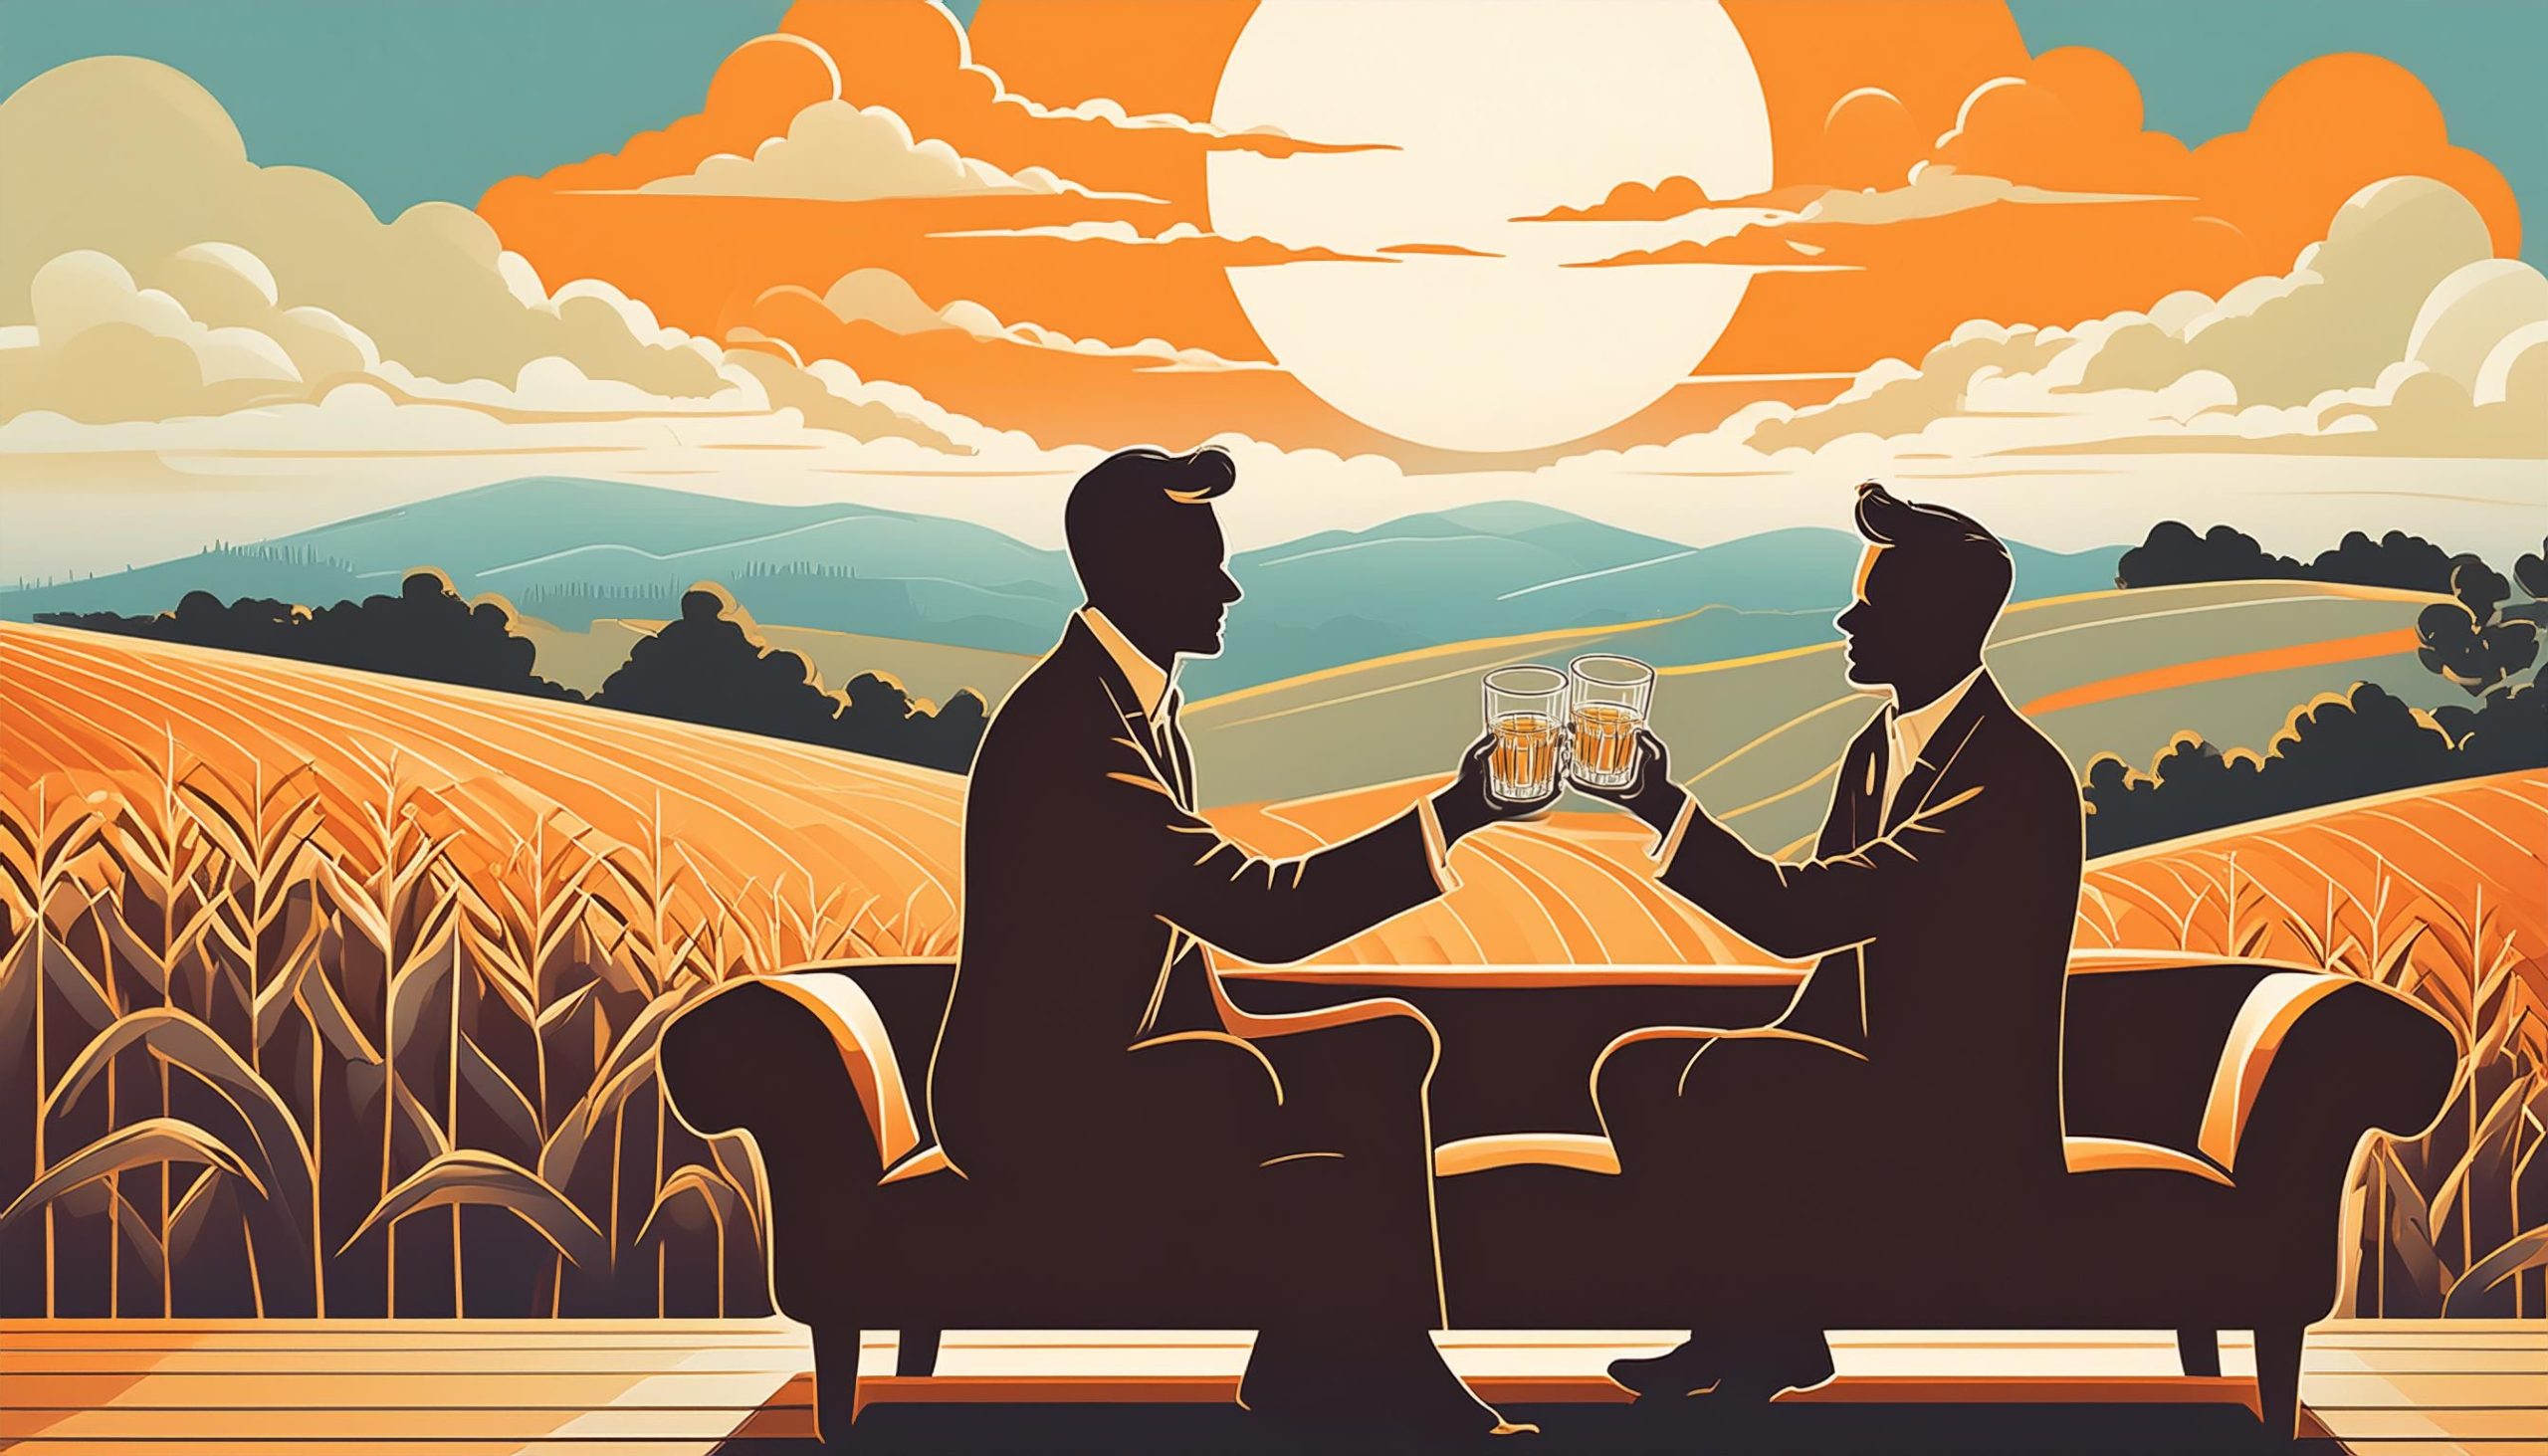 Illustration of two mean clinking together Wild Turkey bourbon at sunset next to a corn field